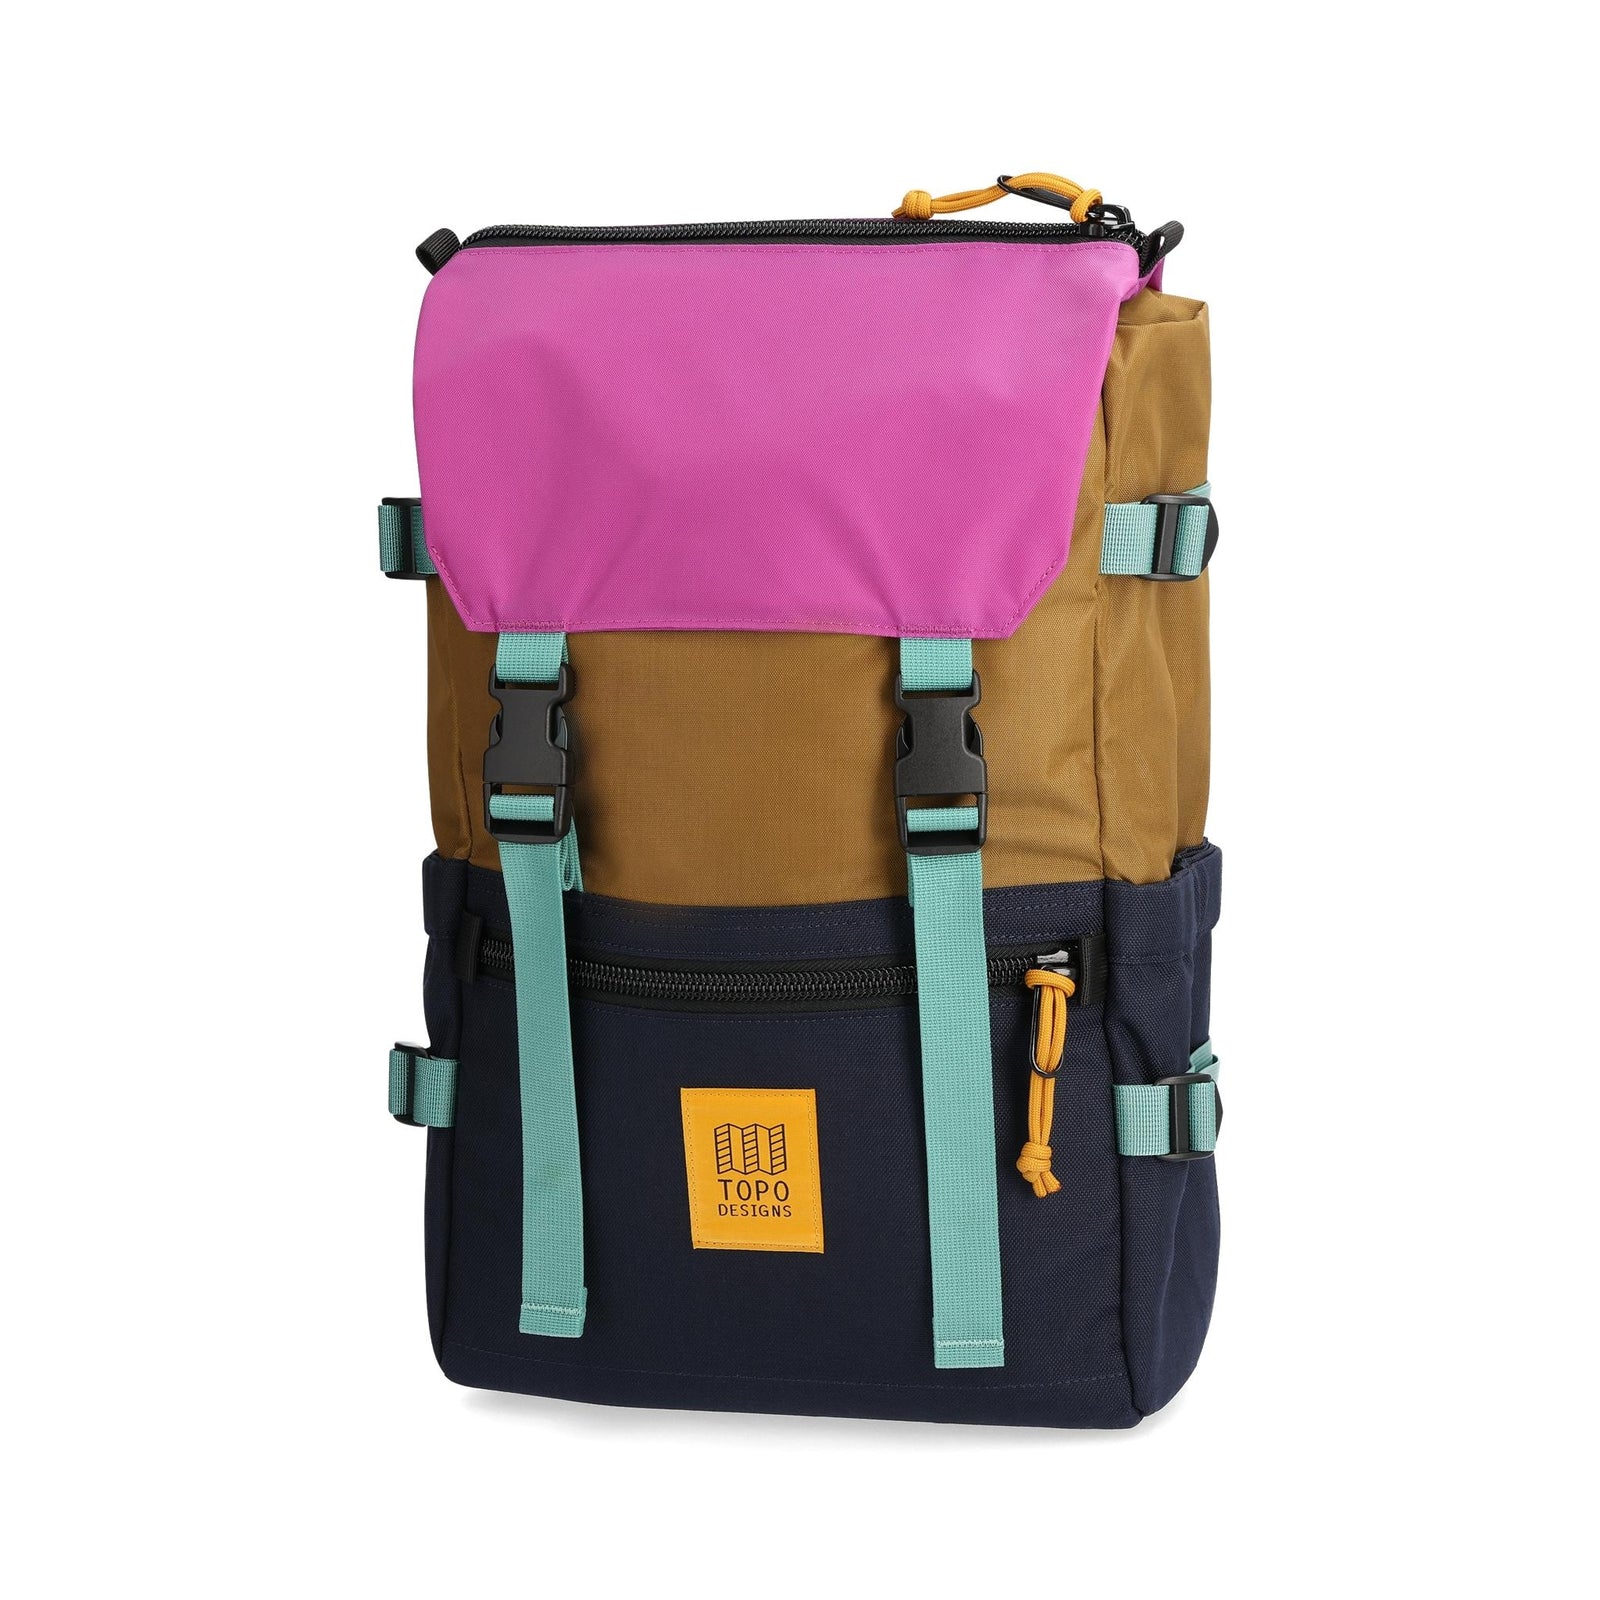 Front View of Topo Designs Rover Pack Classic in "Dark Khaki / Navy"